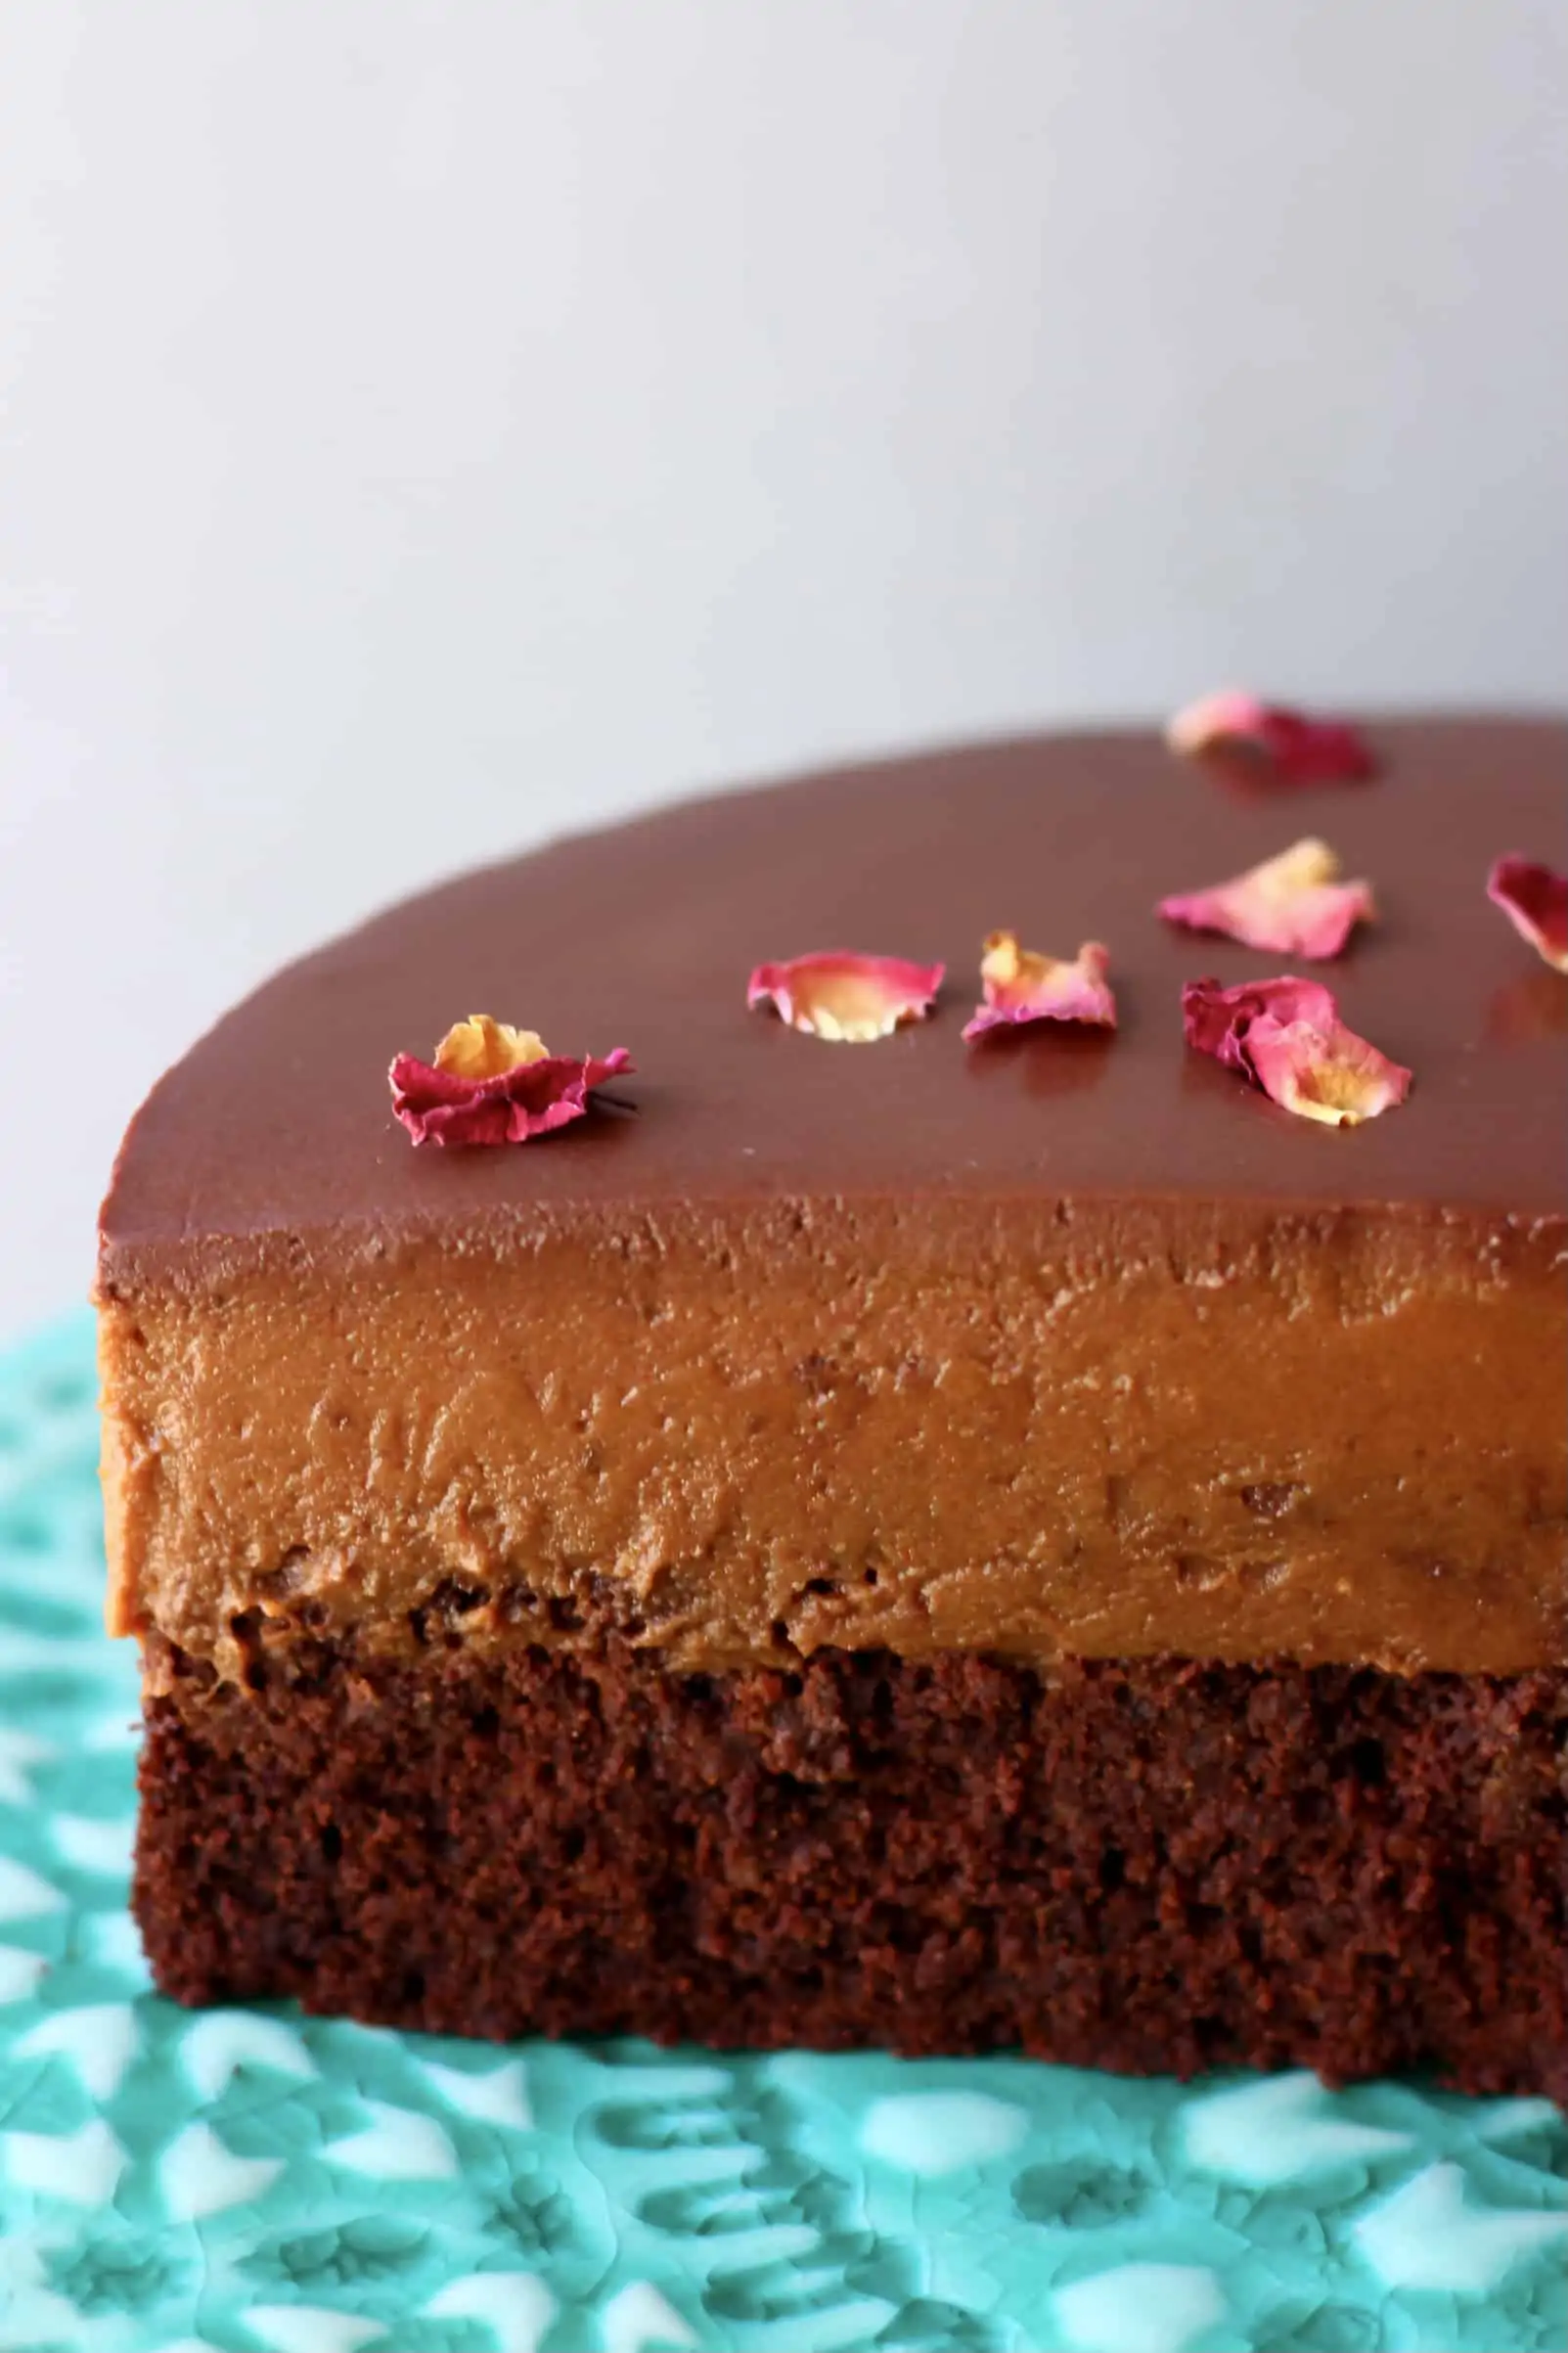 A sliced gluten-free vegan chocolate mousse cake with sponge, chocolate mousse and ganache